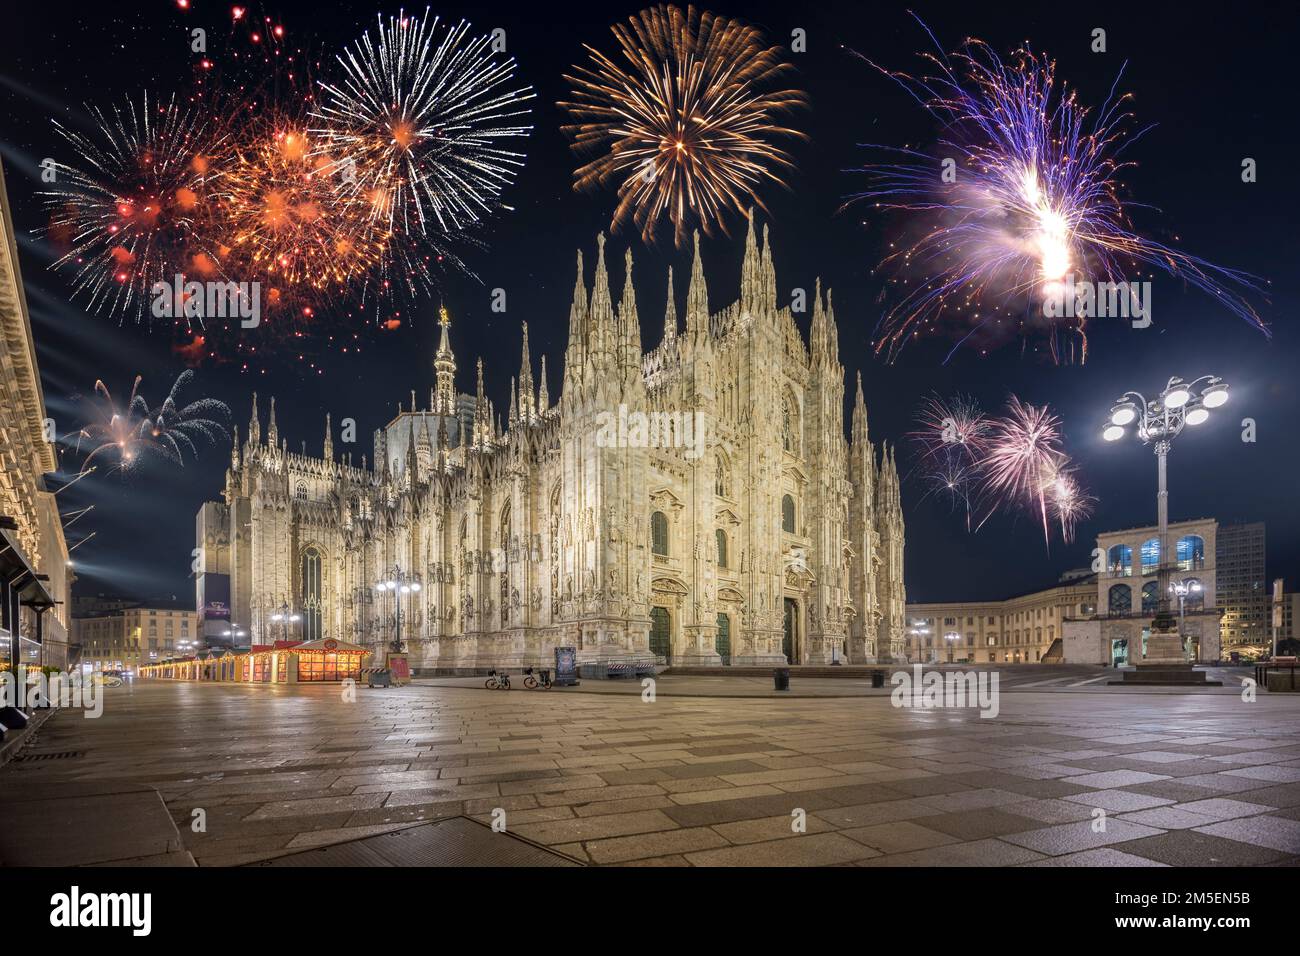 Milan, Italy - December 2022, 07: fireworks on Piazza del Duomo di Milano  in perfect new year style. No people are visible Stock Photo - Alamy